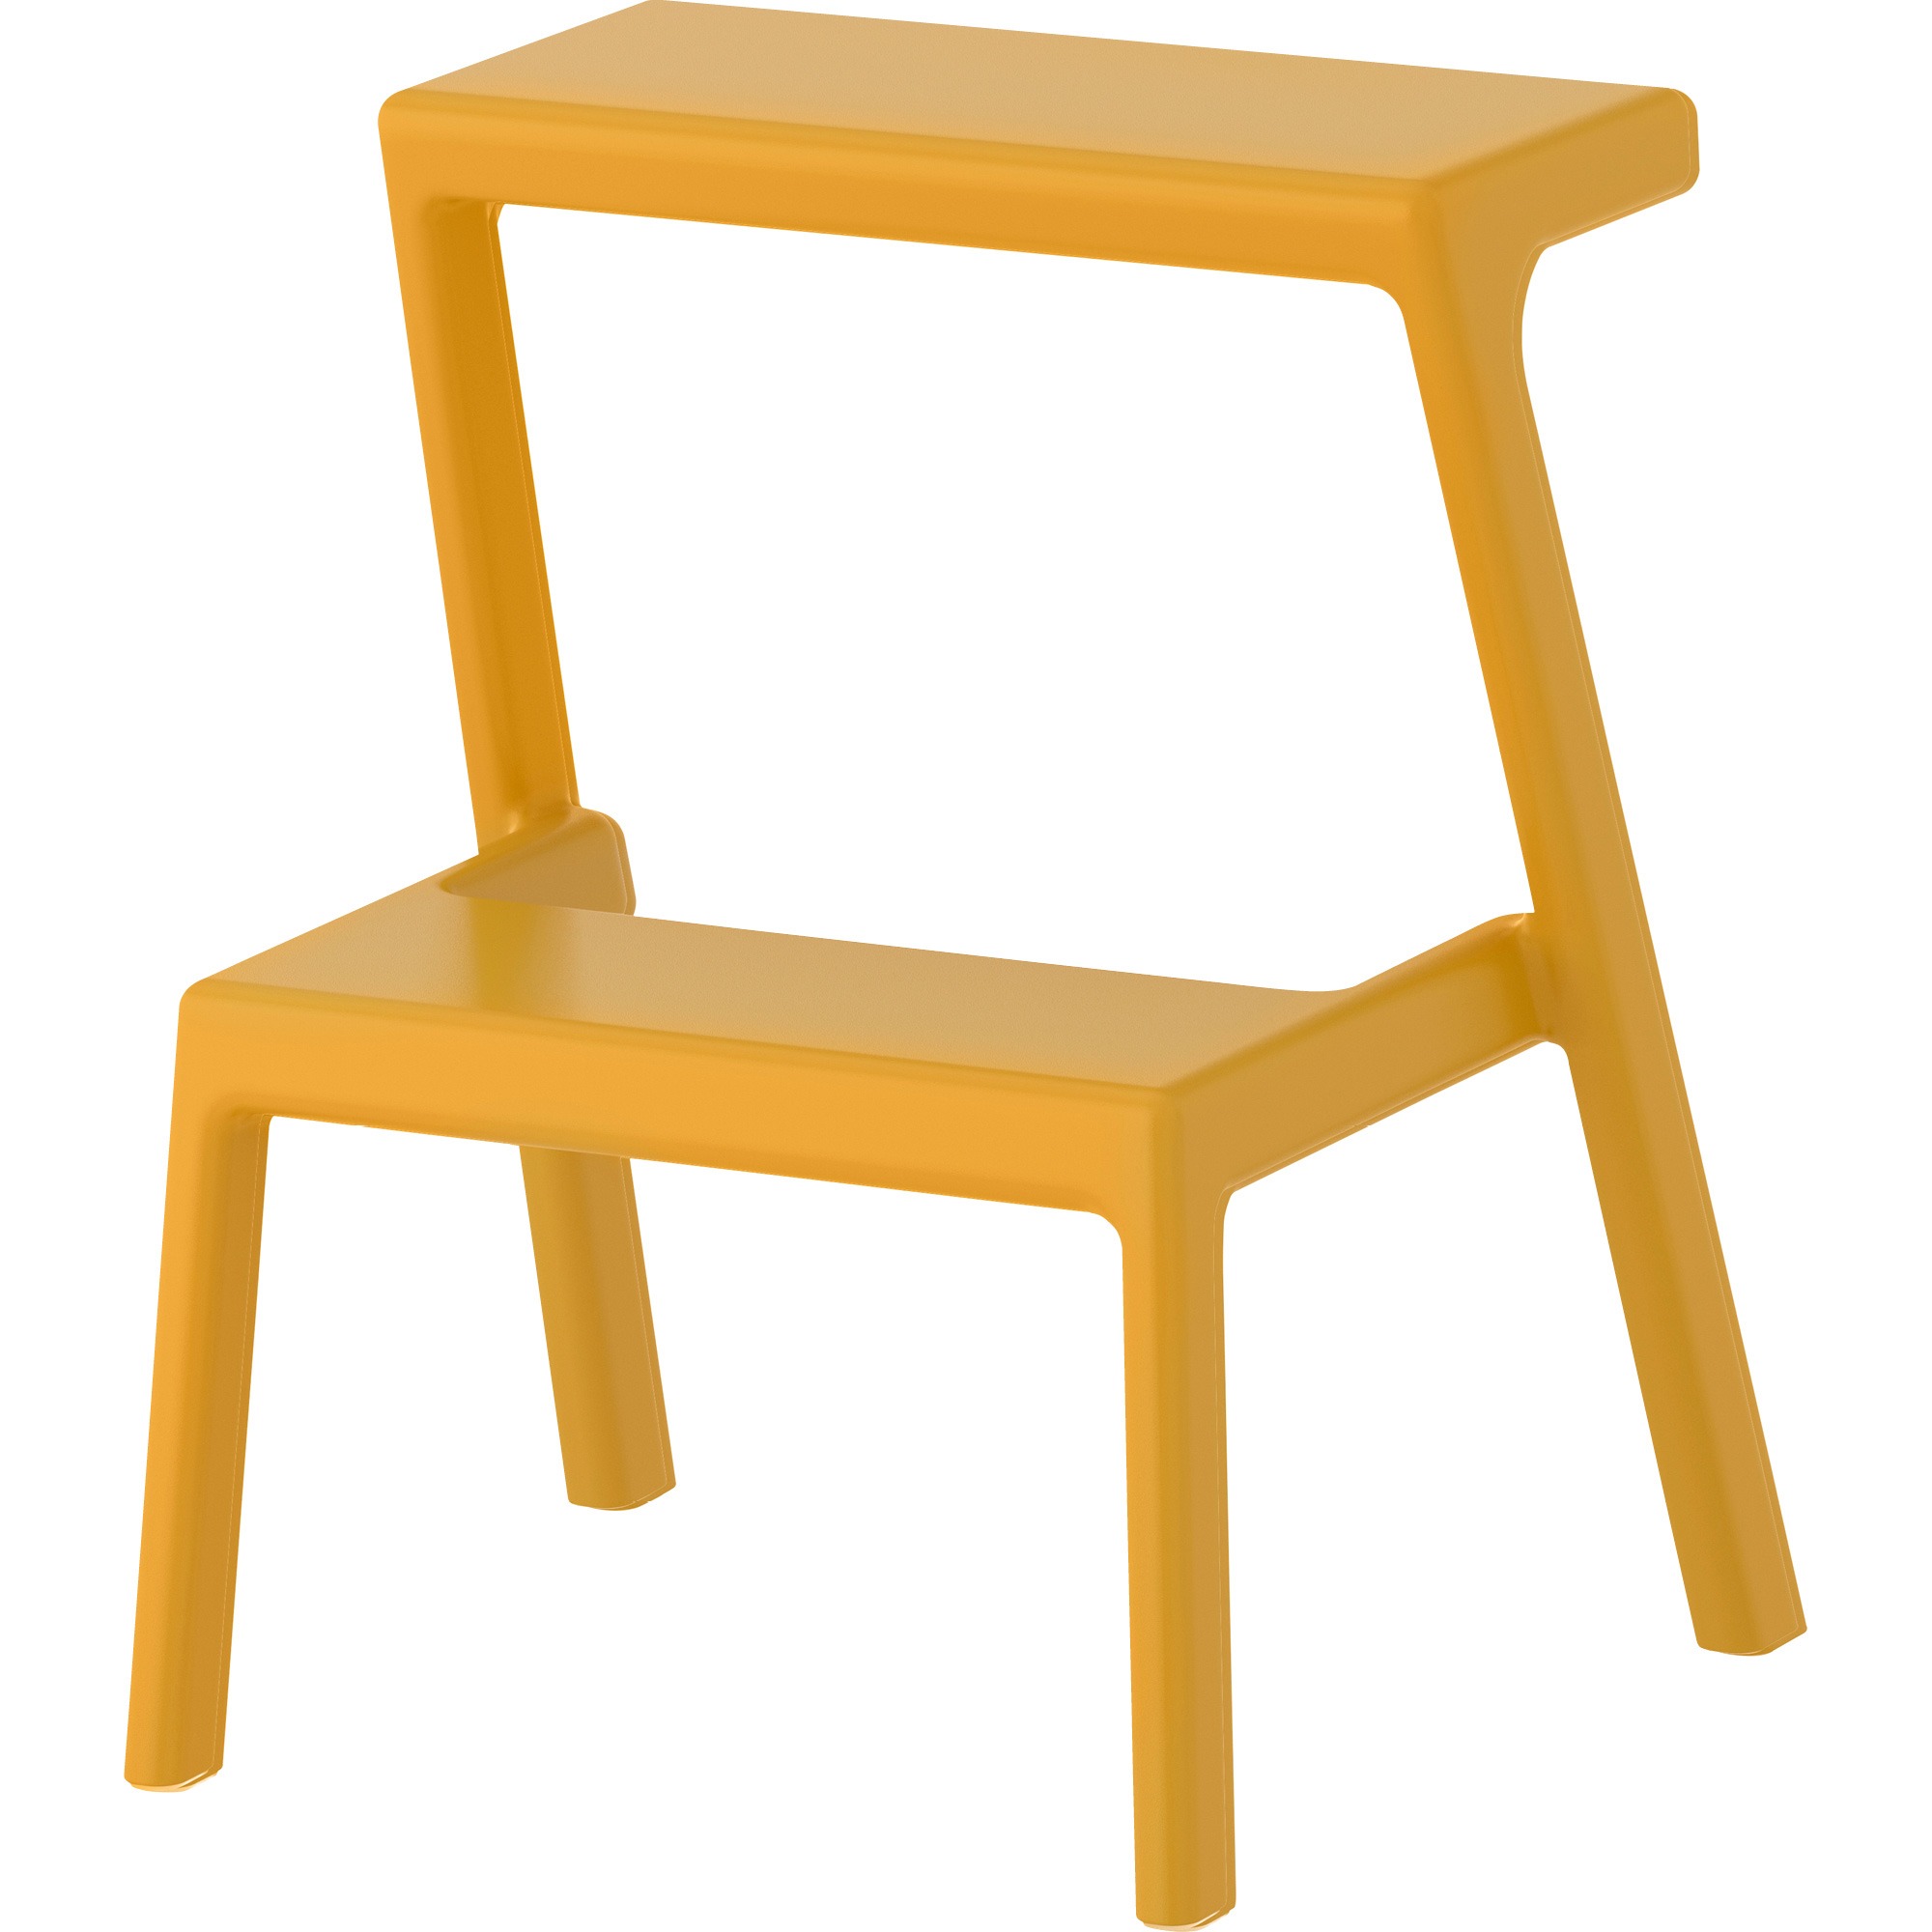 Read the story behind MÄSTERBY step stool 2014 - IKEA Museum